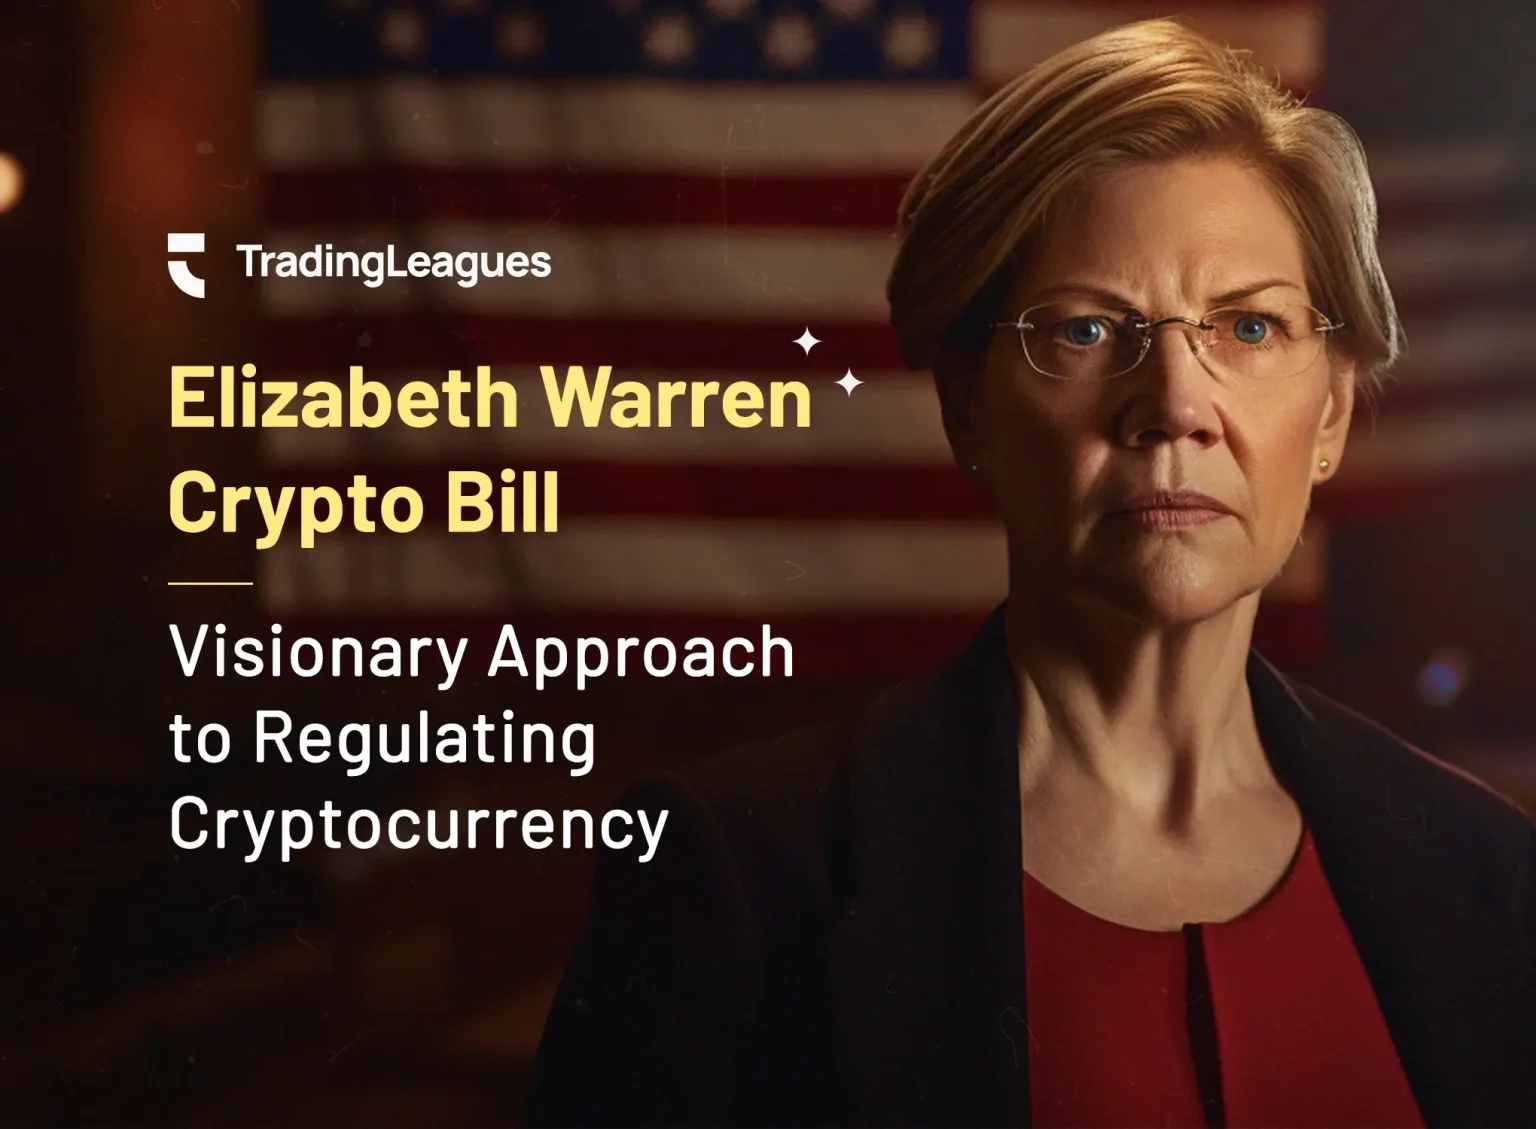 Learn the implications of Elizabeth Warren's proposed Digital Asset Anti-Money Laundering Act. Learn more about the criticisms and consequences of the Act here.